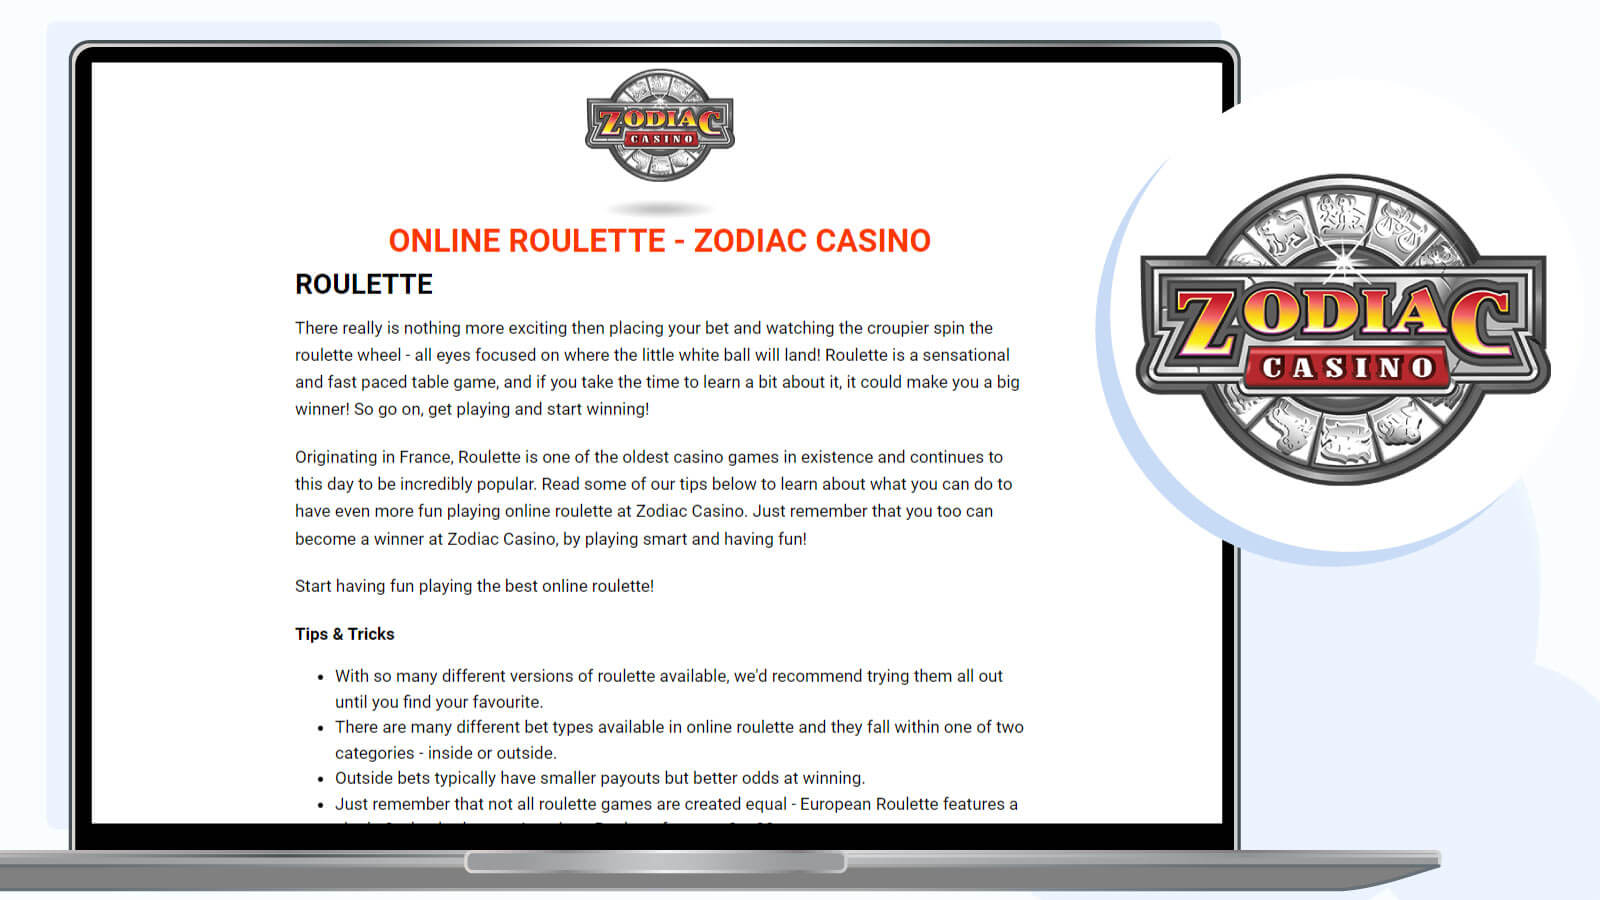 Zodiac Casino – Top Online Roulette Casino with Highest Roulette Max Bet